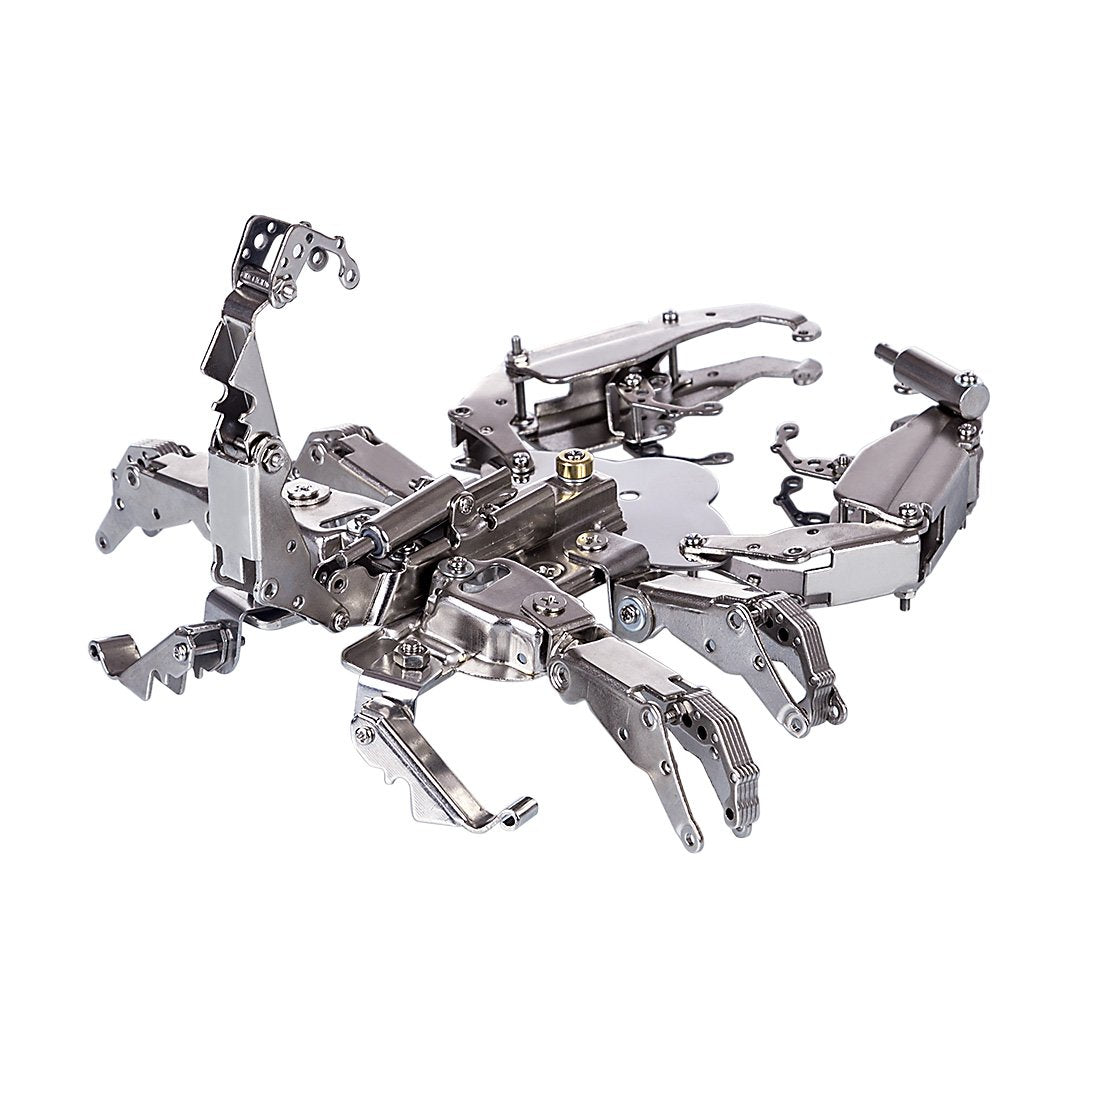 2in1 DIY Metal Assembly 3D Scorpion Deformation Robot Mecha Puzzle Kits